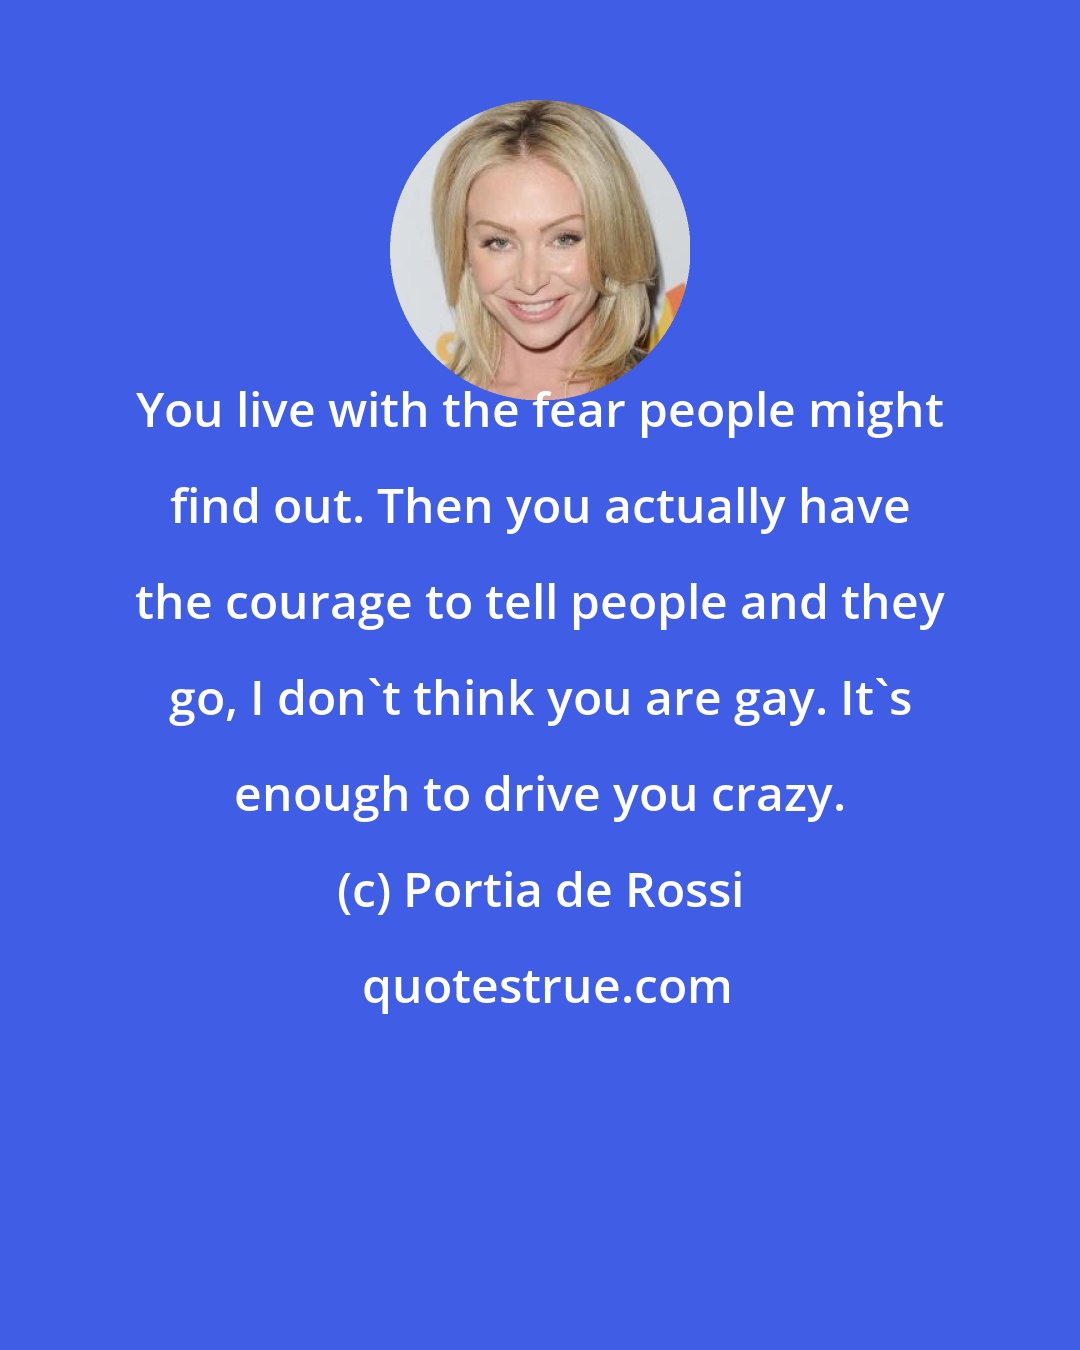 Portia de Rossi: You live with the fear people might find out. Then you actually have the courage to tell people and they go, I don't think you are gay. It's enough to drive you crazy.